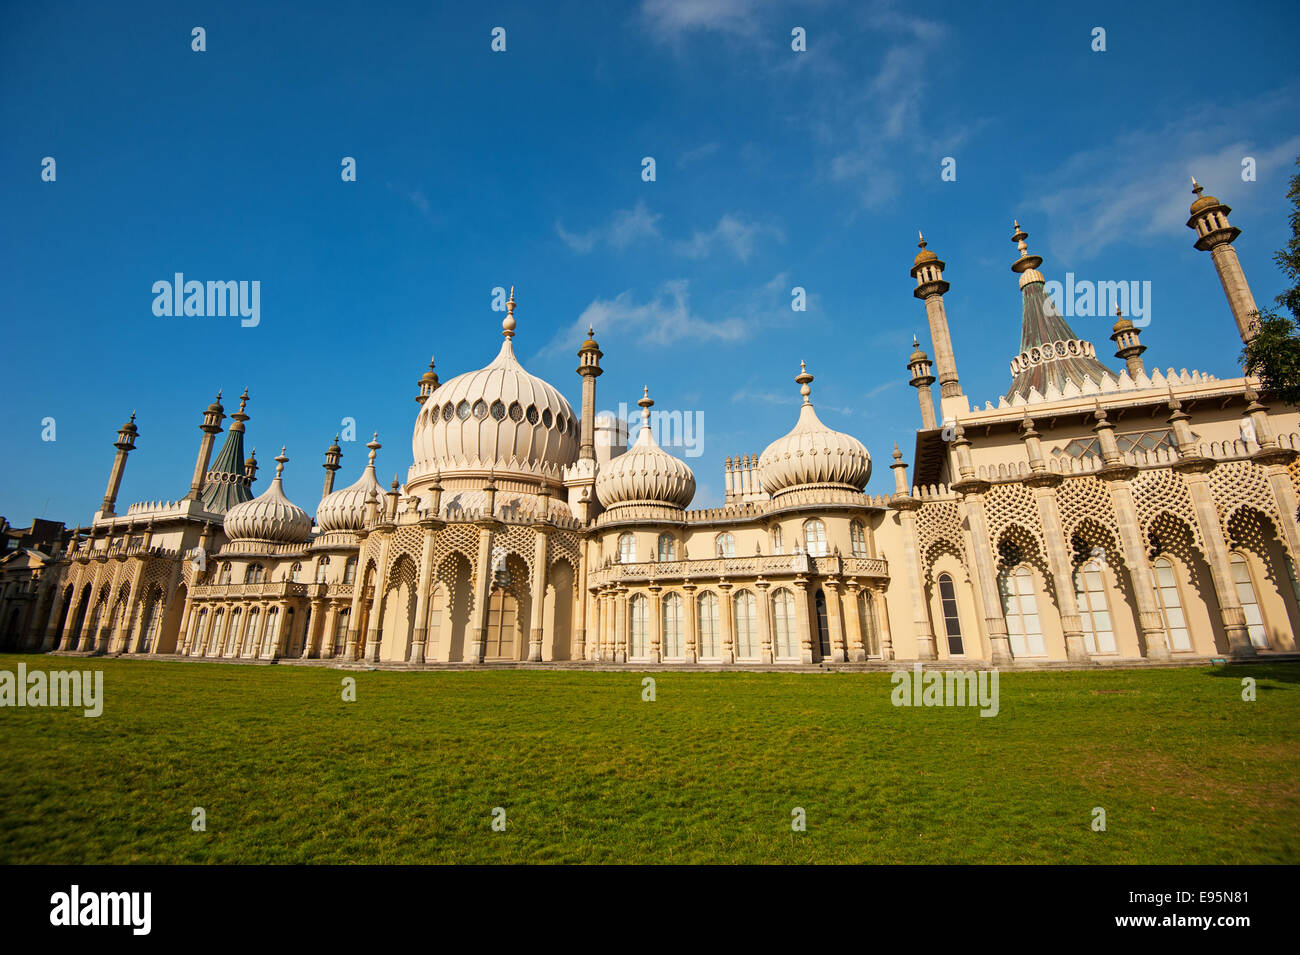 Brighton's Royal Pavilion the spectacular regency palace built for the Prince Regent George IV Stock Photo